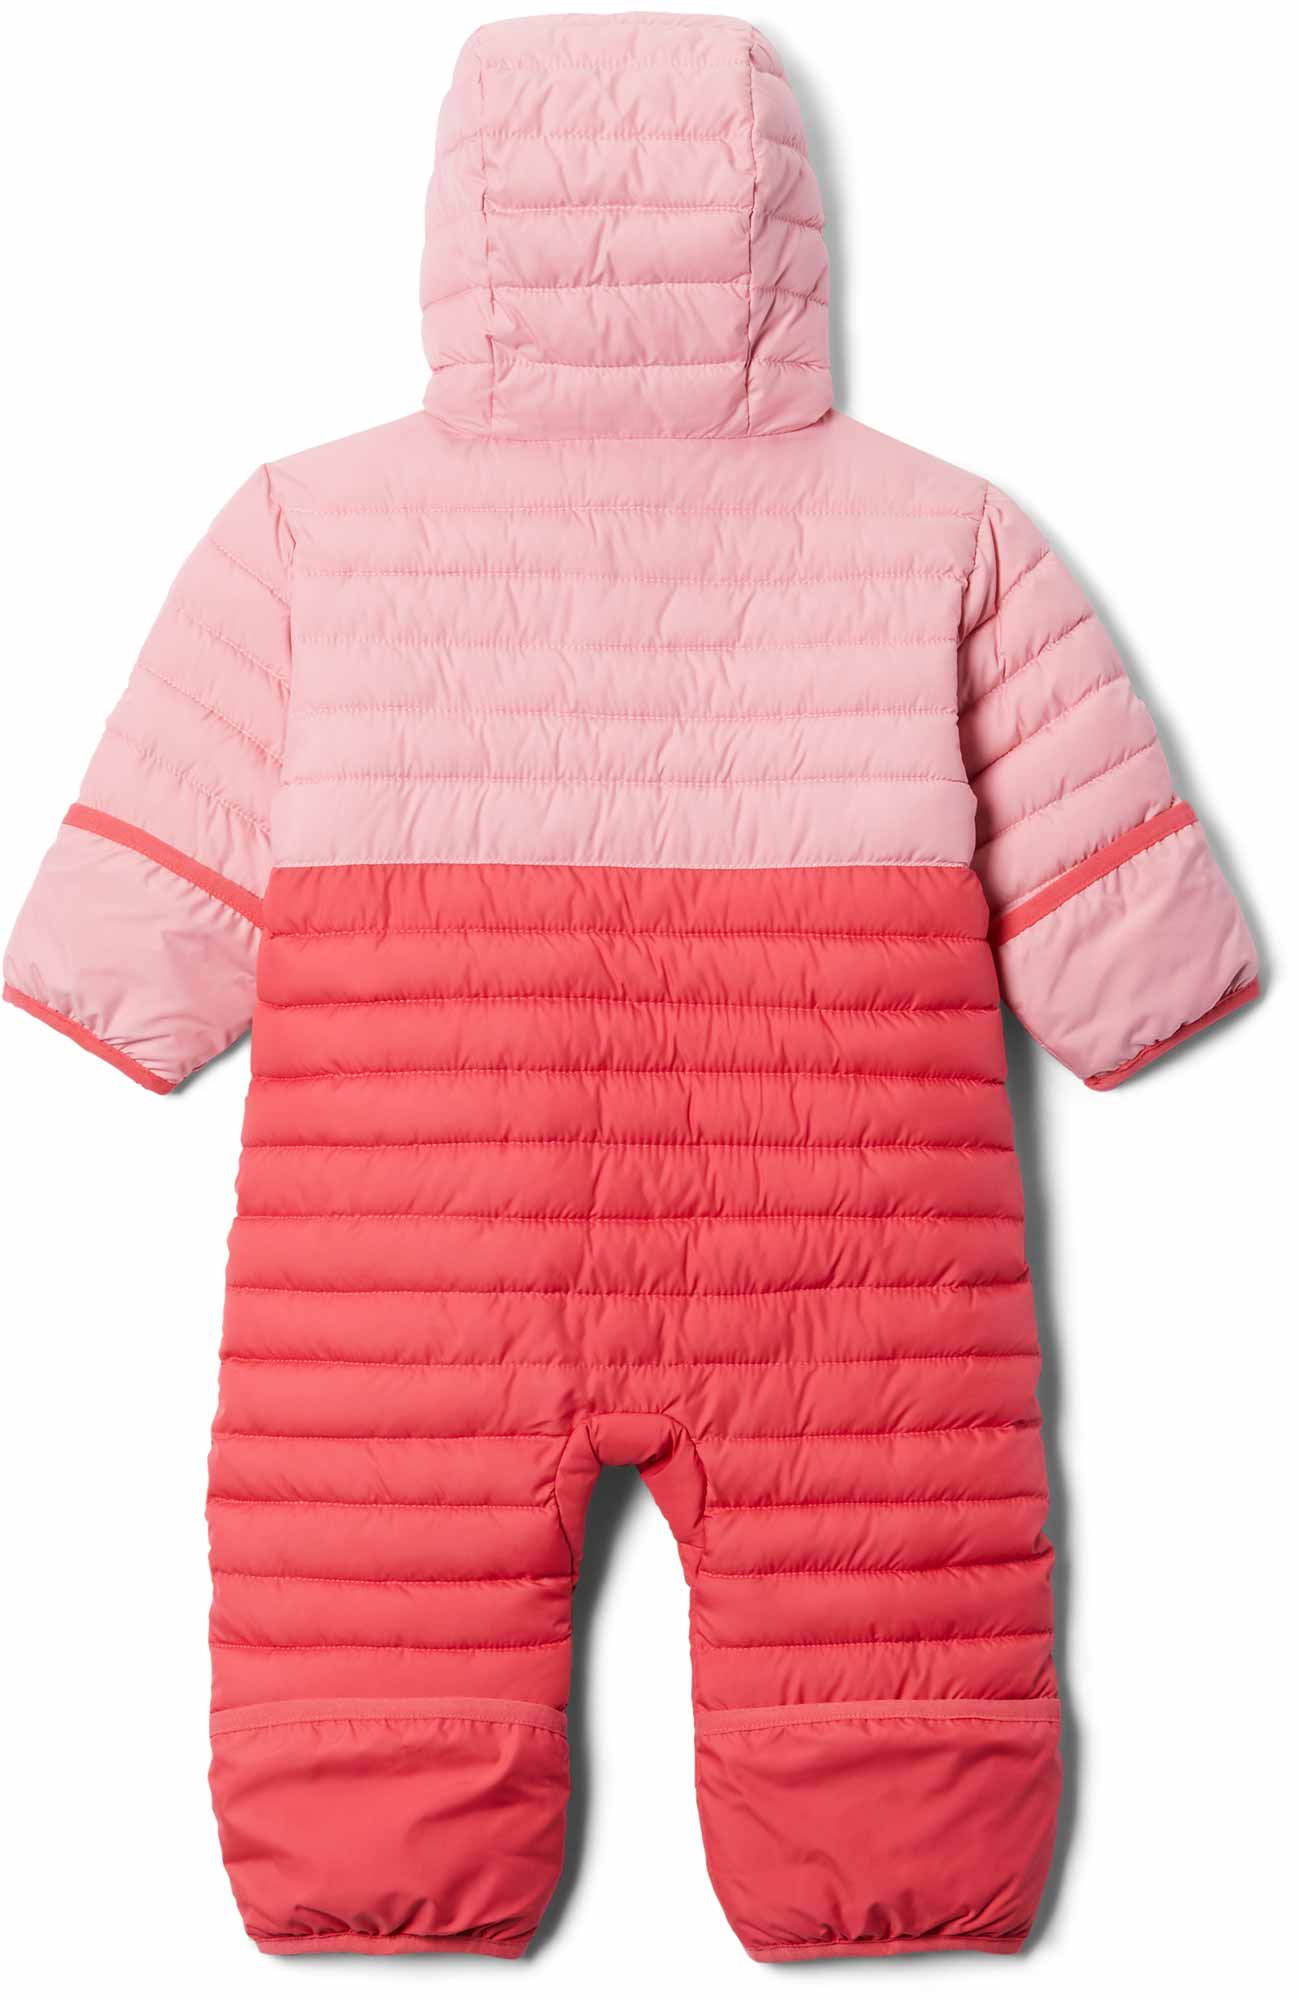 Kids’ reversible winter coverall